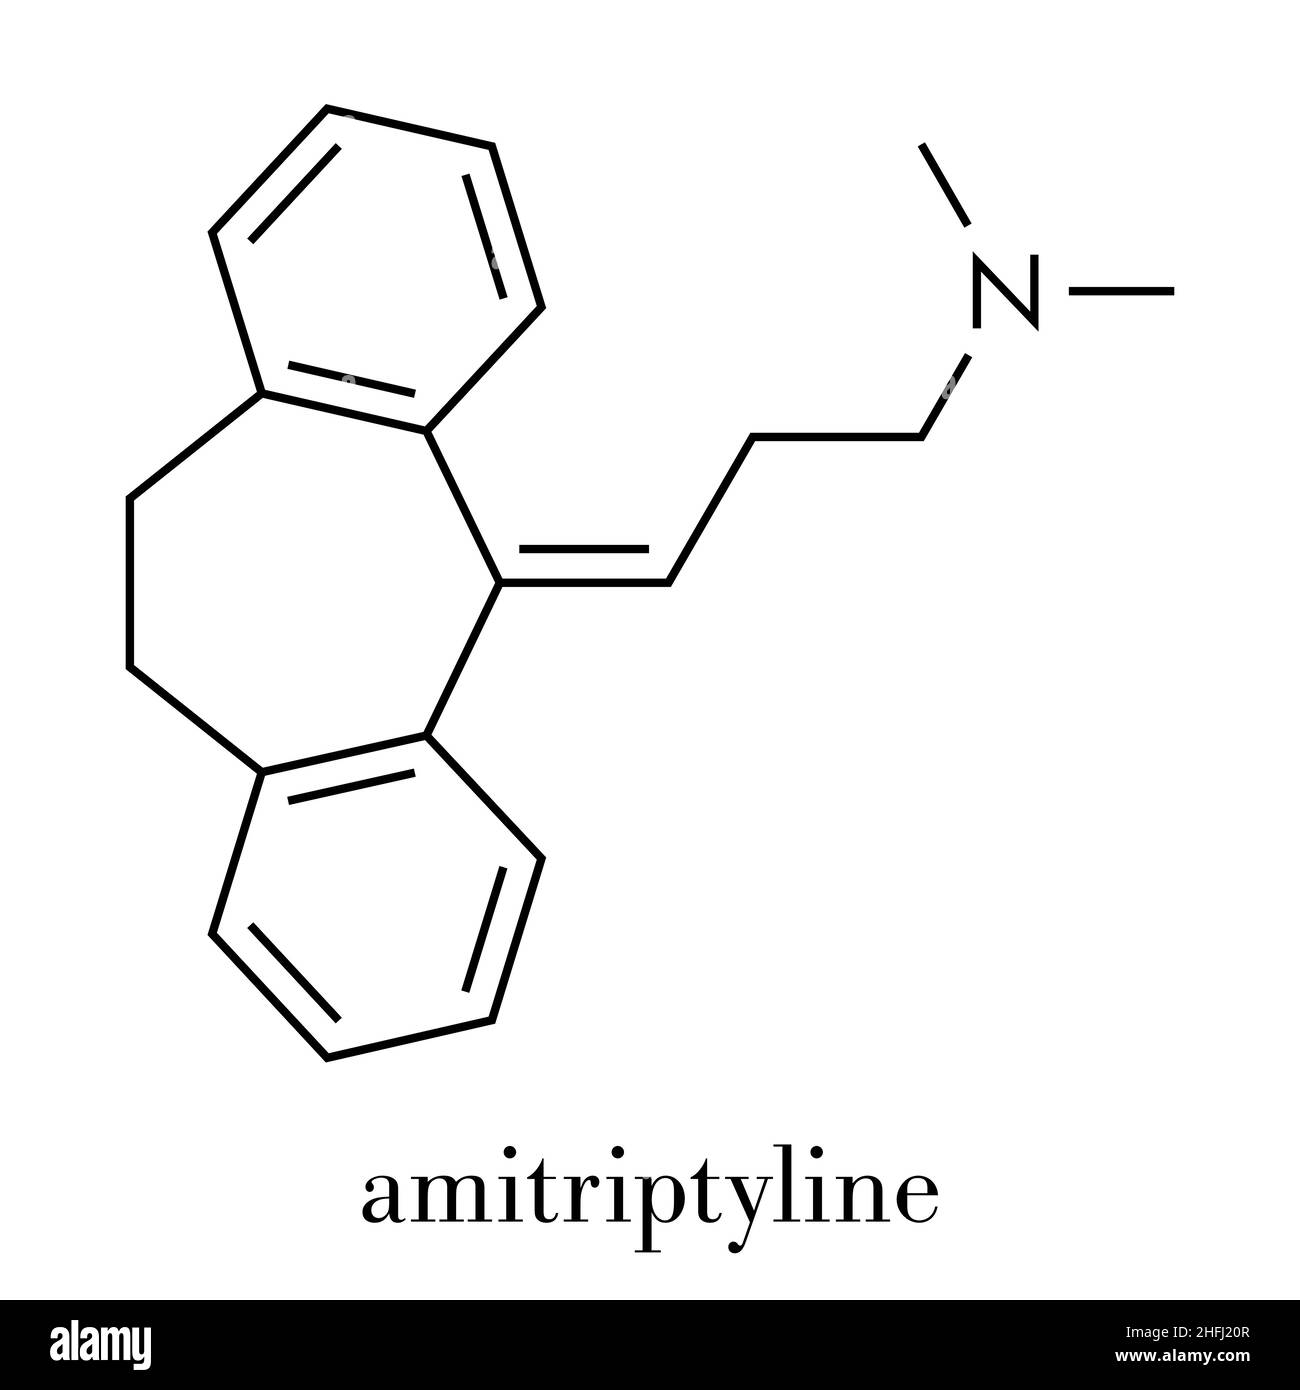 Amitriptyline tricyclic antidepressant drug molecule. Used in treatment of clinical depression. Skeletal formula. Stock Vector